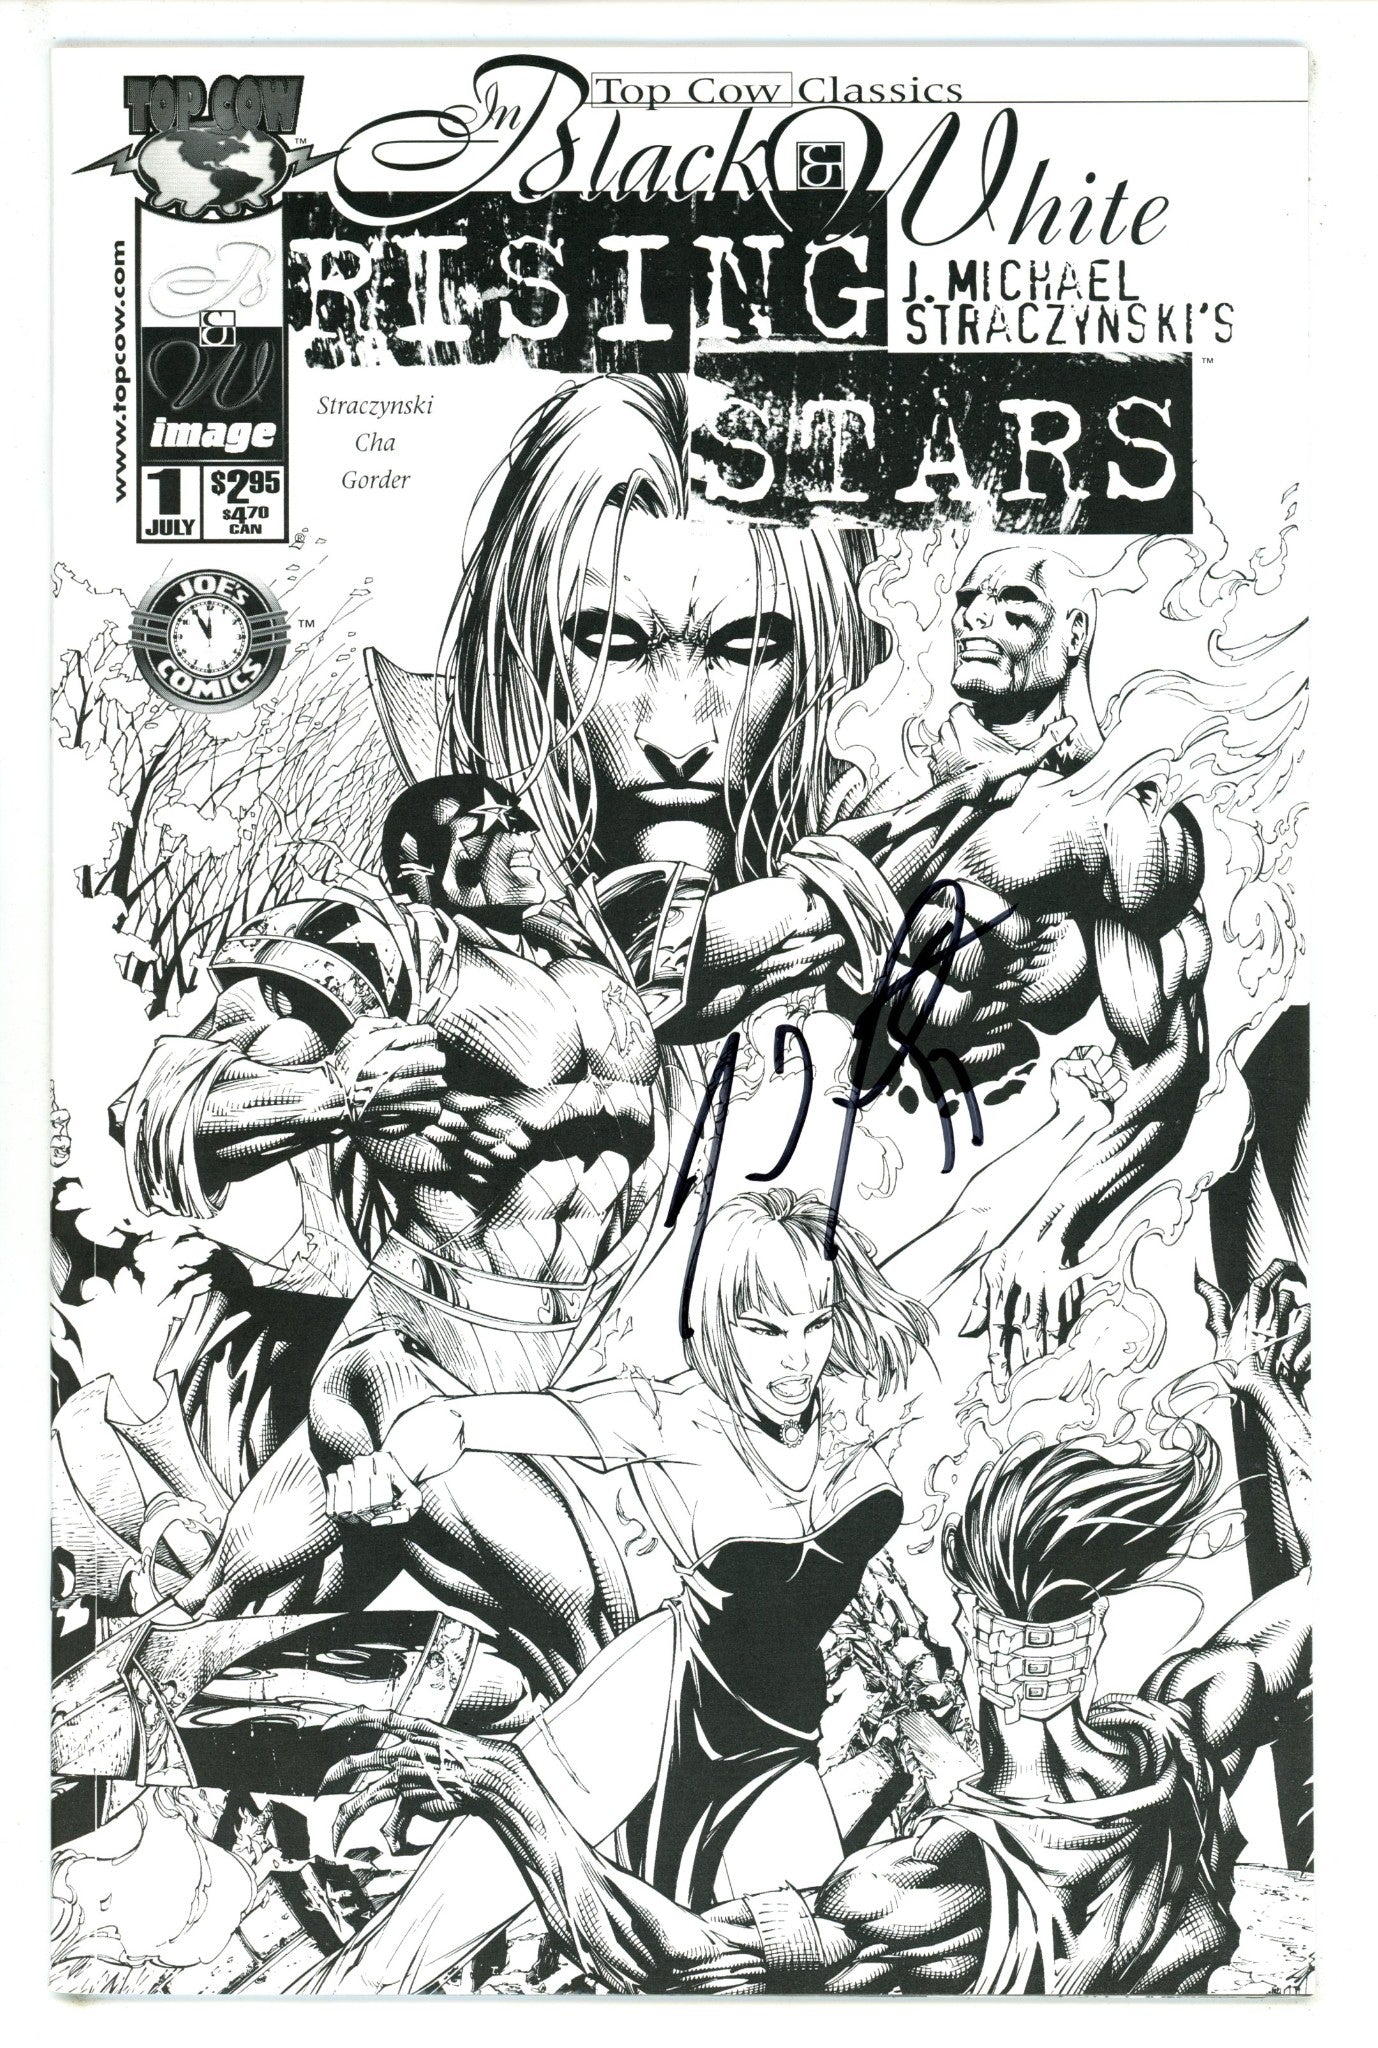 Top Cow Classics in Black and White: Rising Stars 1 Signed J. Michael Straczynski (2000)